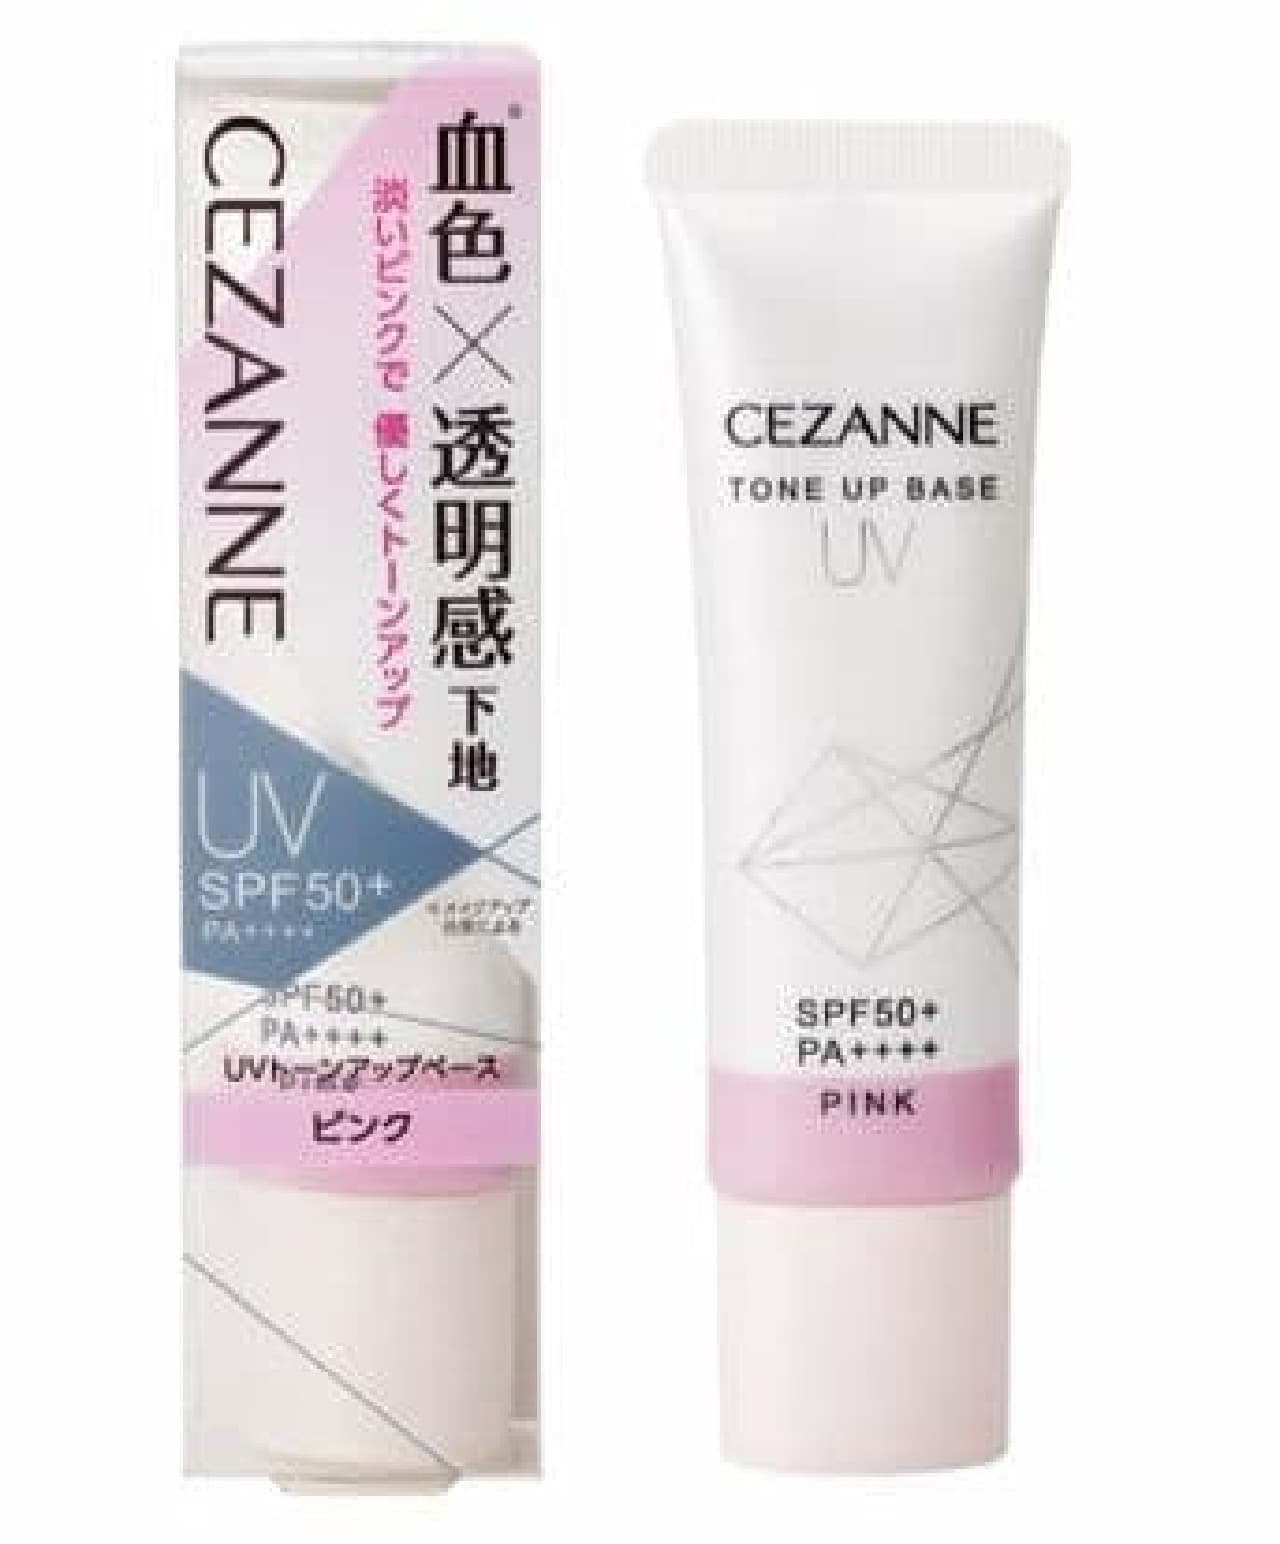 "Pink", the new color of "Cezanne UV Tone Up Base"